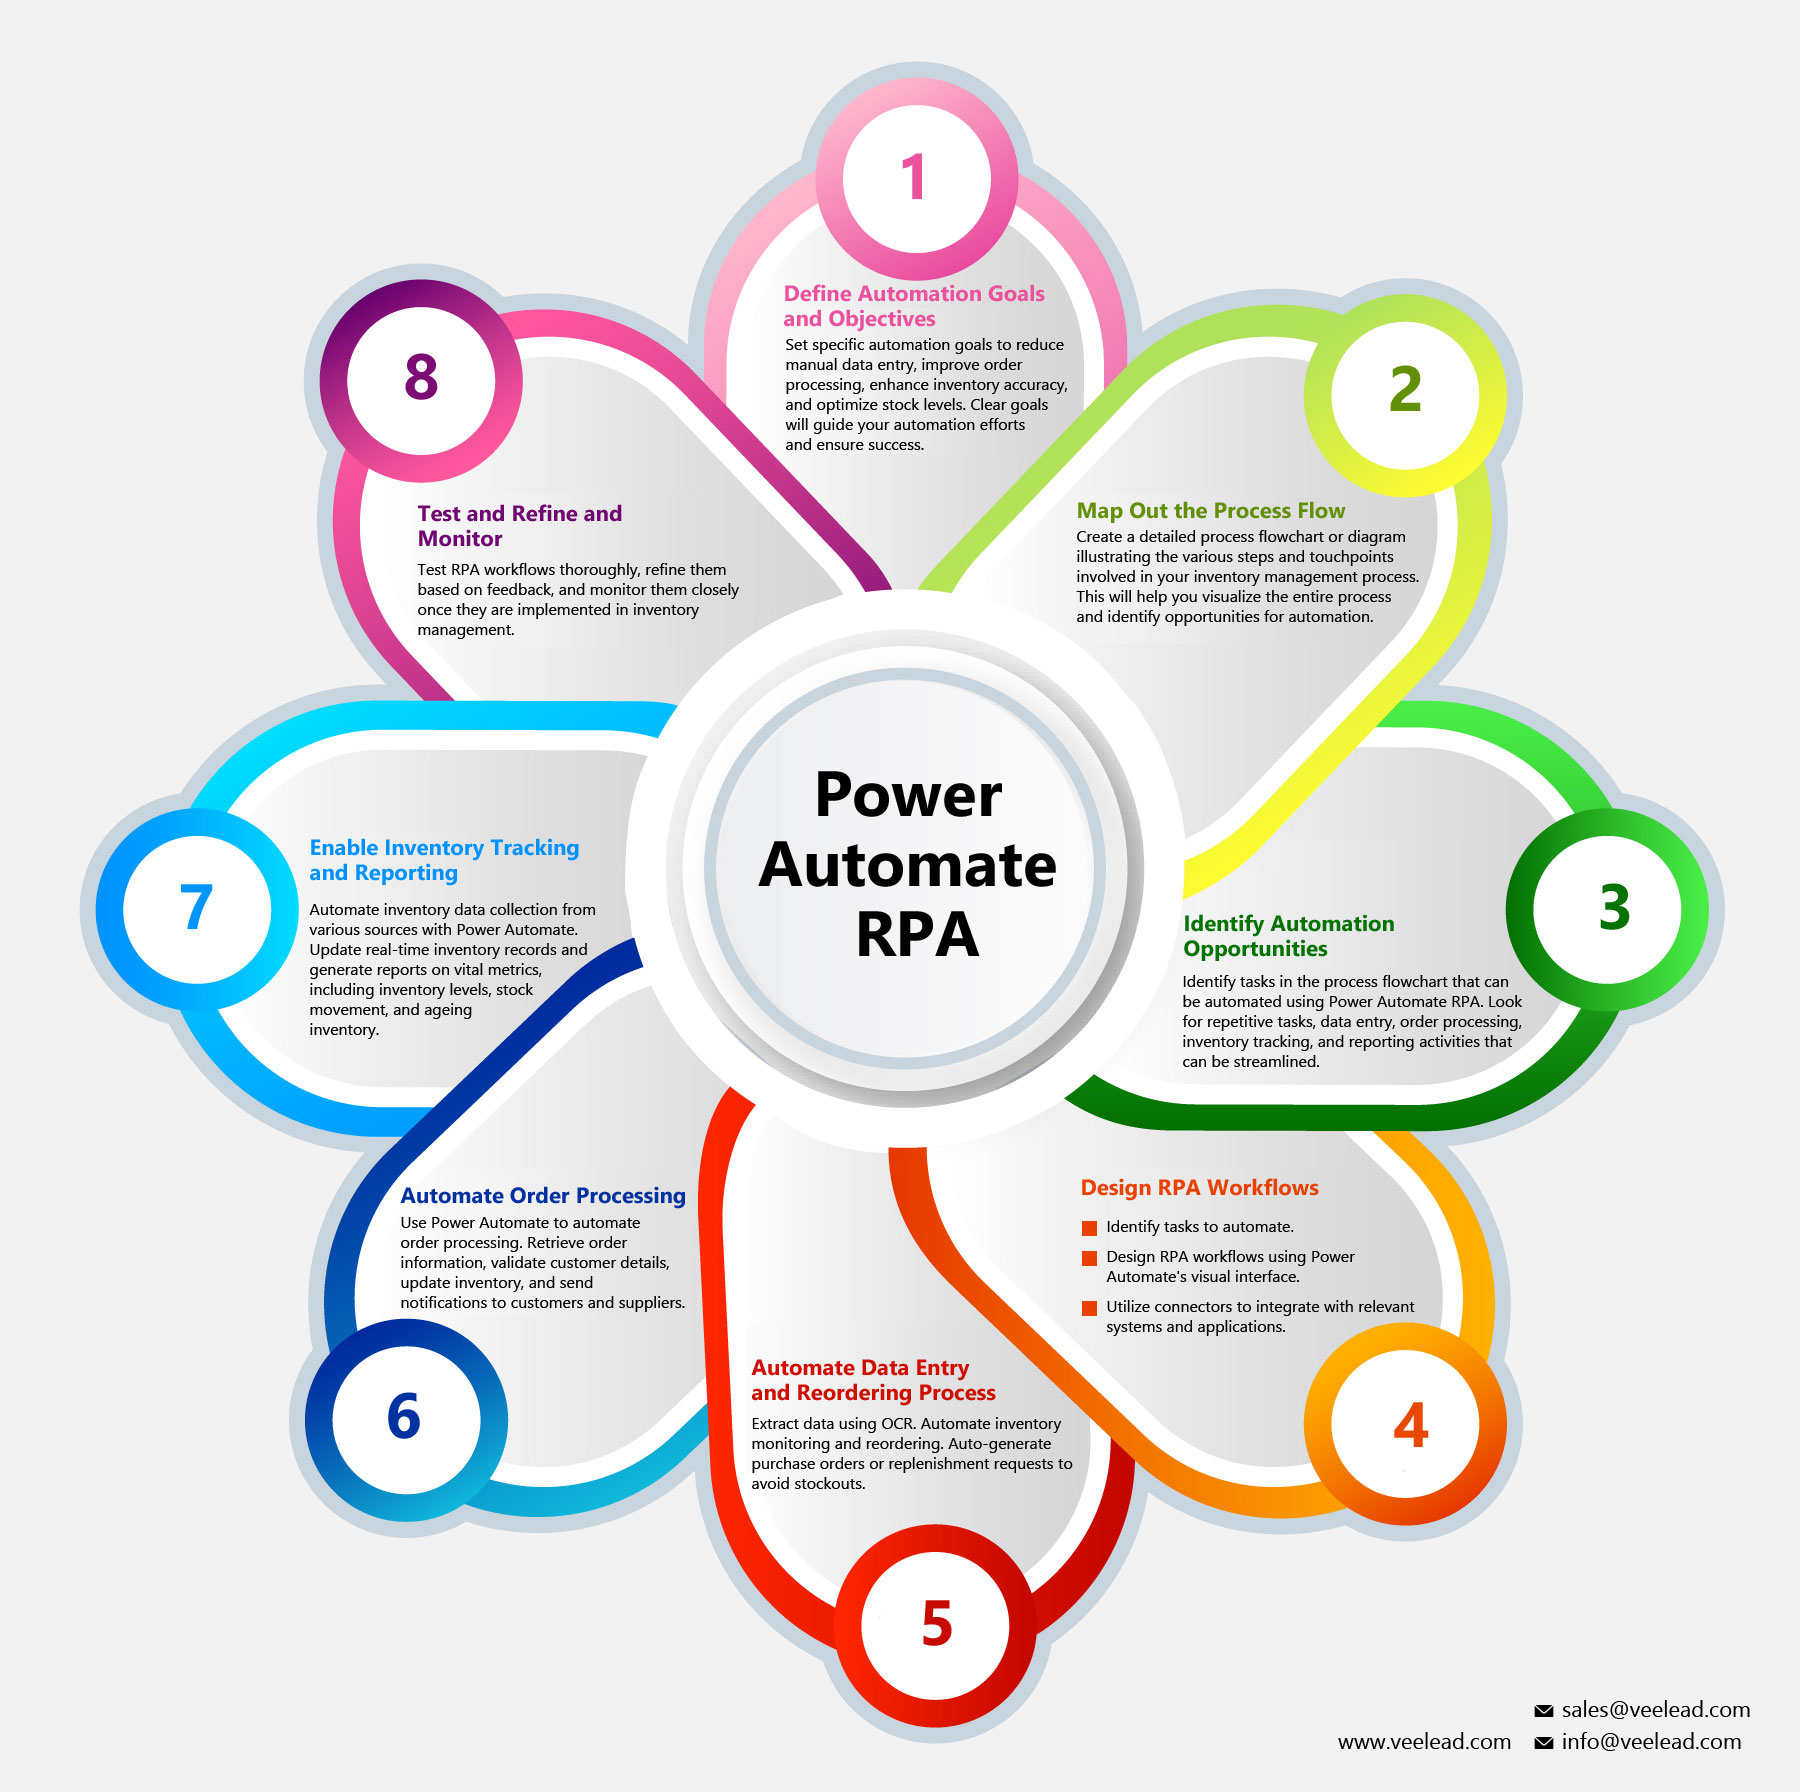 Power Automate RPA Services